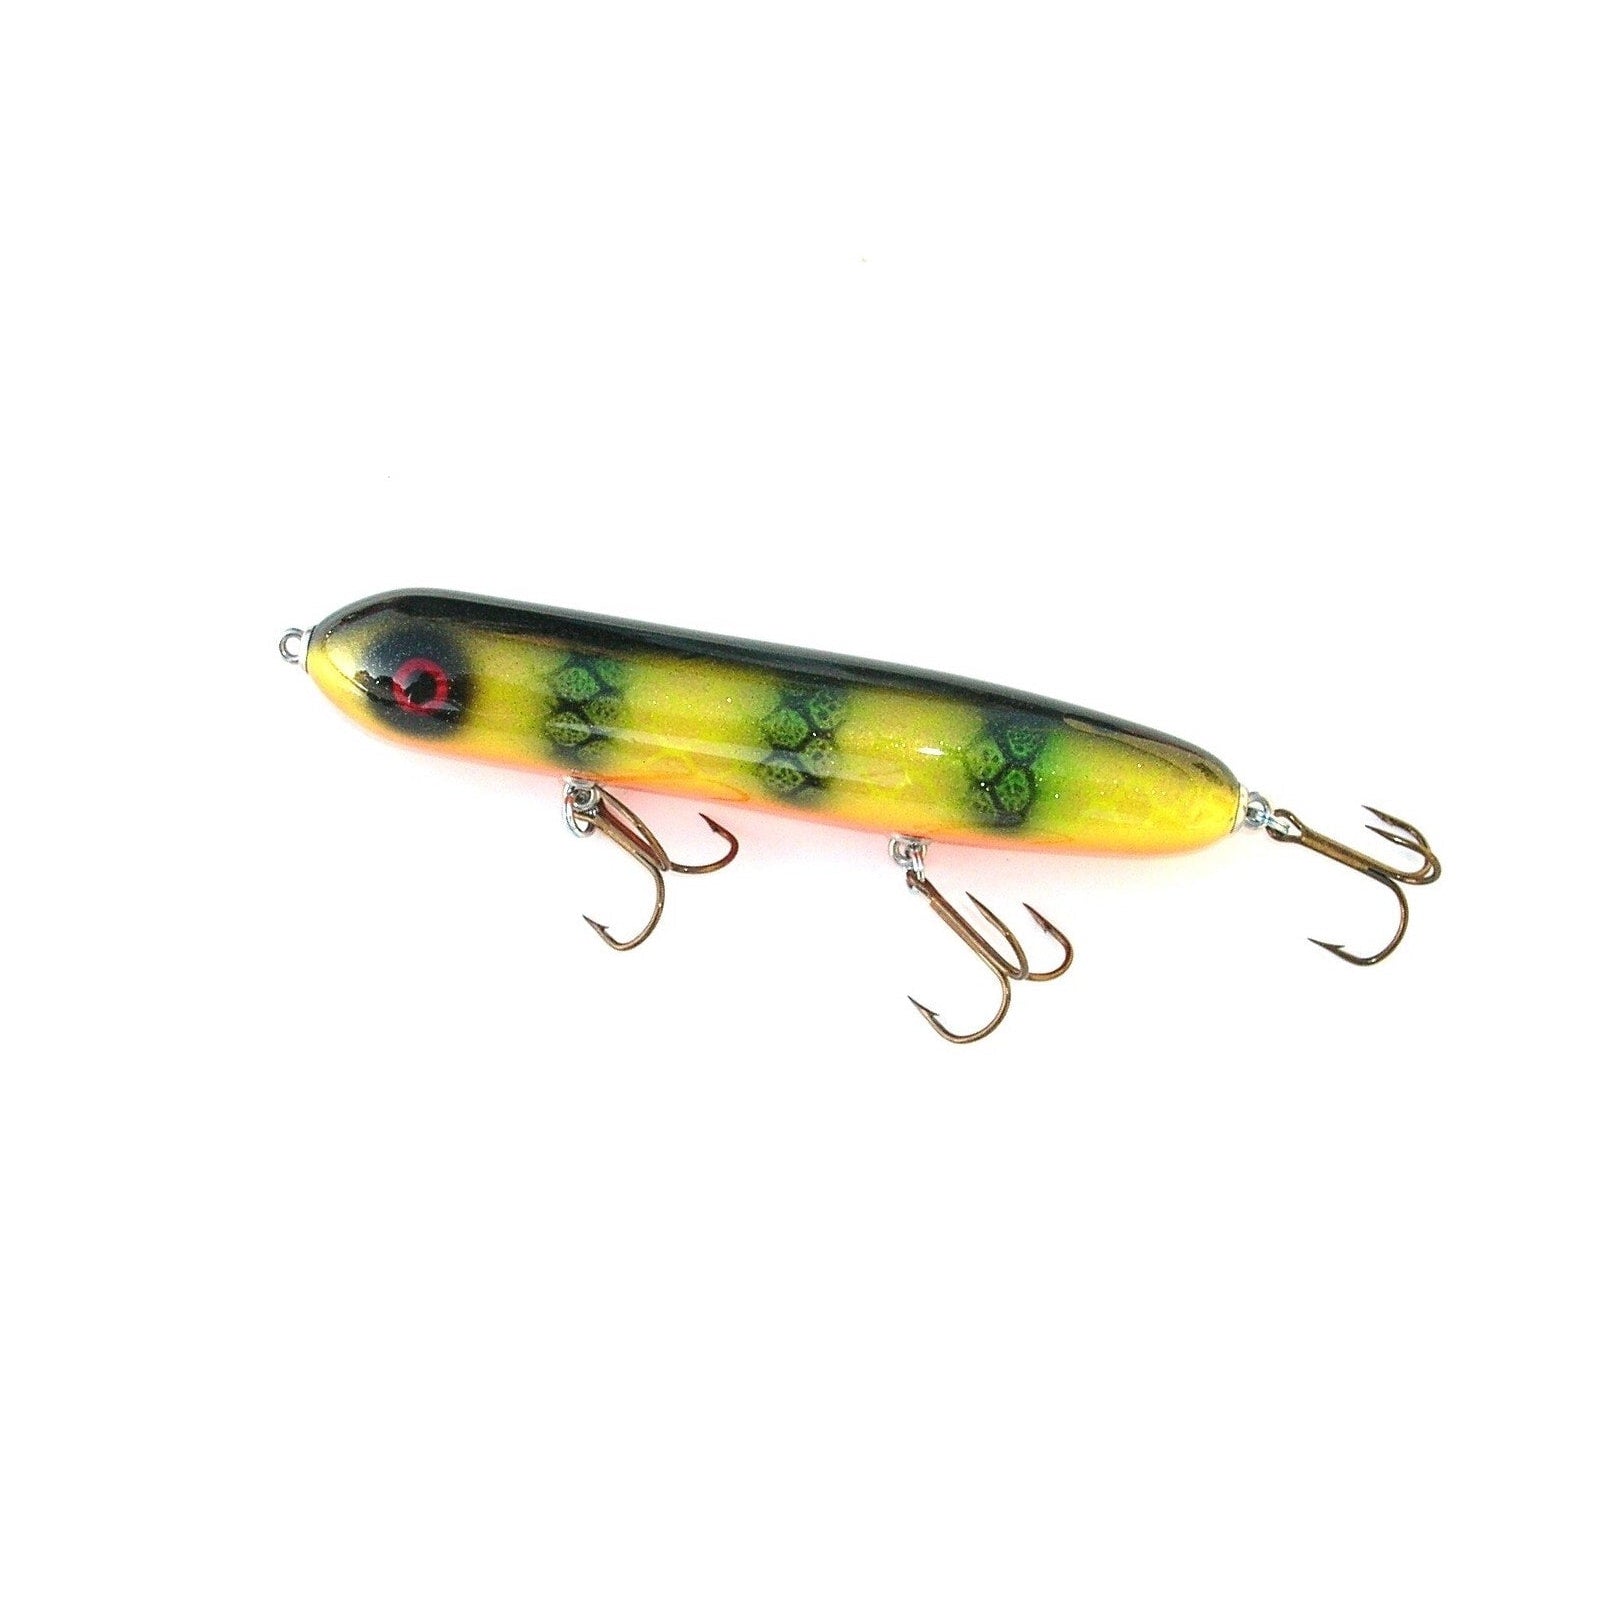 Suick Wabull 8 Dive/Glide Bait | Musky Lures Perch